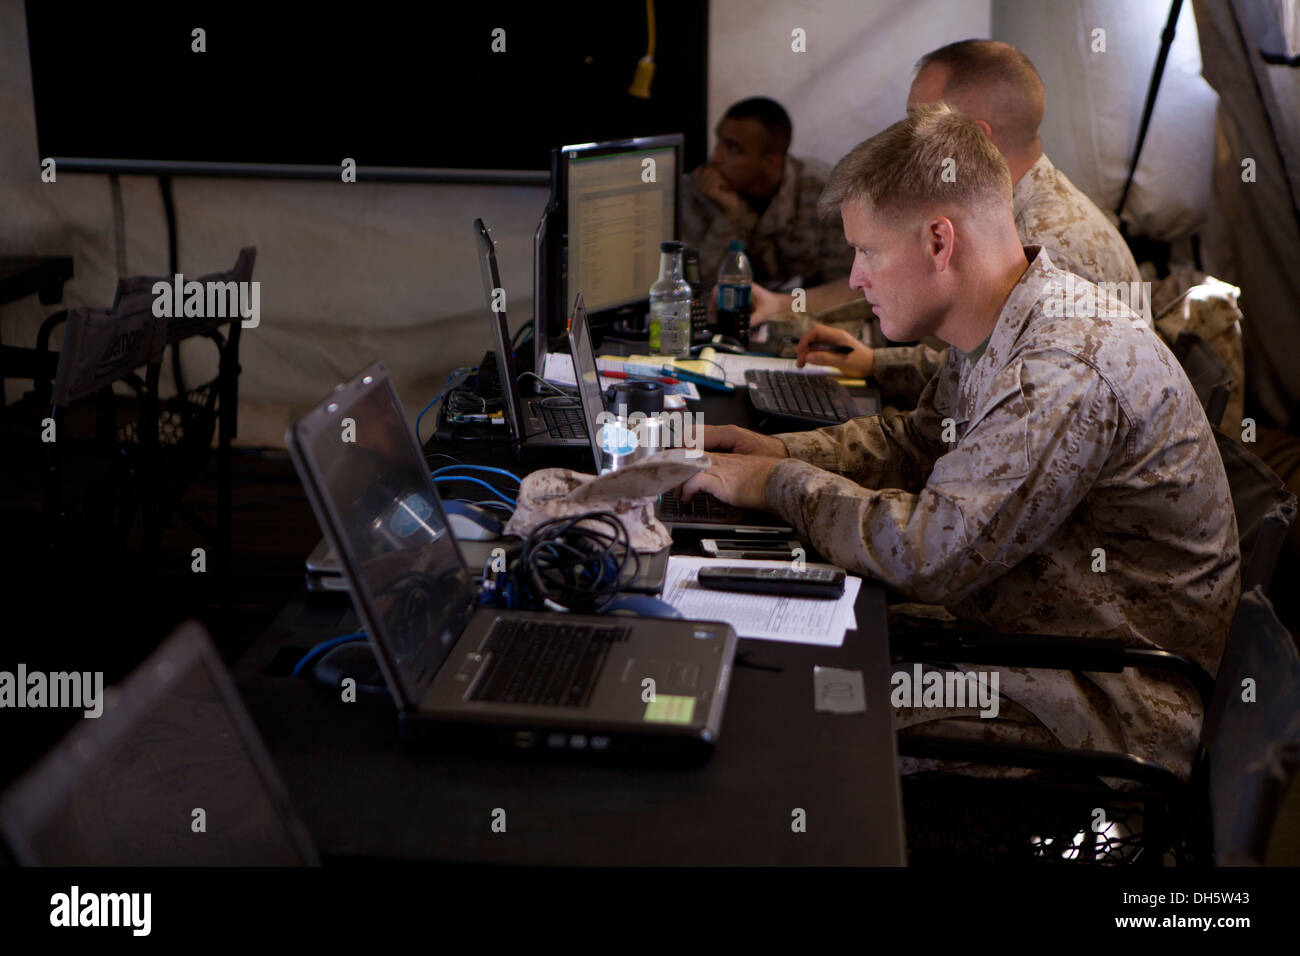 U.S. Marine Corps Lieutenant Col. Eric R. Olsen, Operations Officer with Marine Aircraft Group (MAG) 24, participates in operations during a simulated Command Operations Center (COC) at Marine Corps Base (MCB) Hawaii, Kaneohe Bay, October 25th, 2013. MAG- Stock Photo